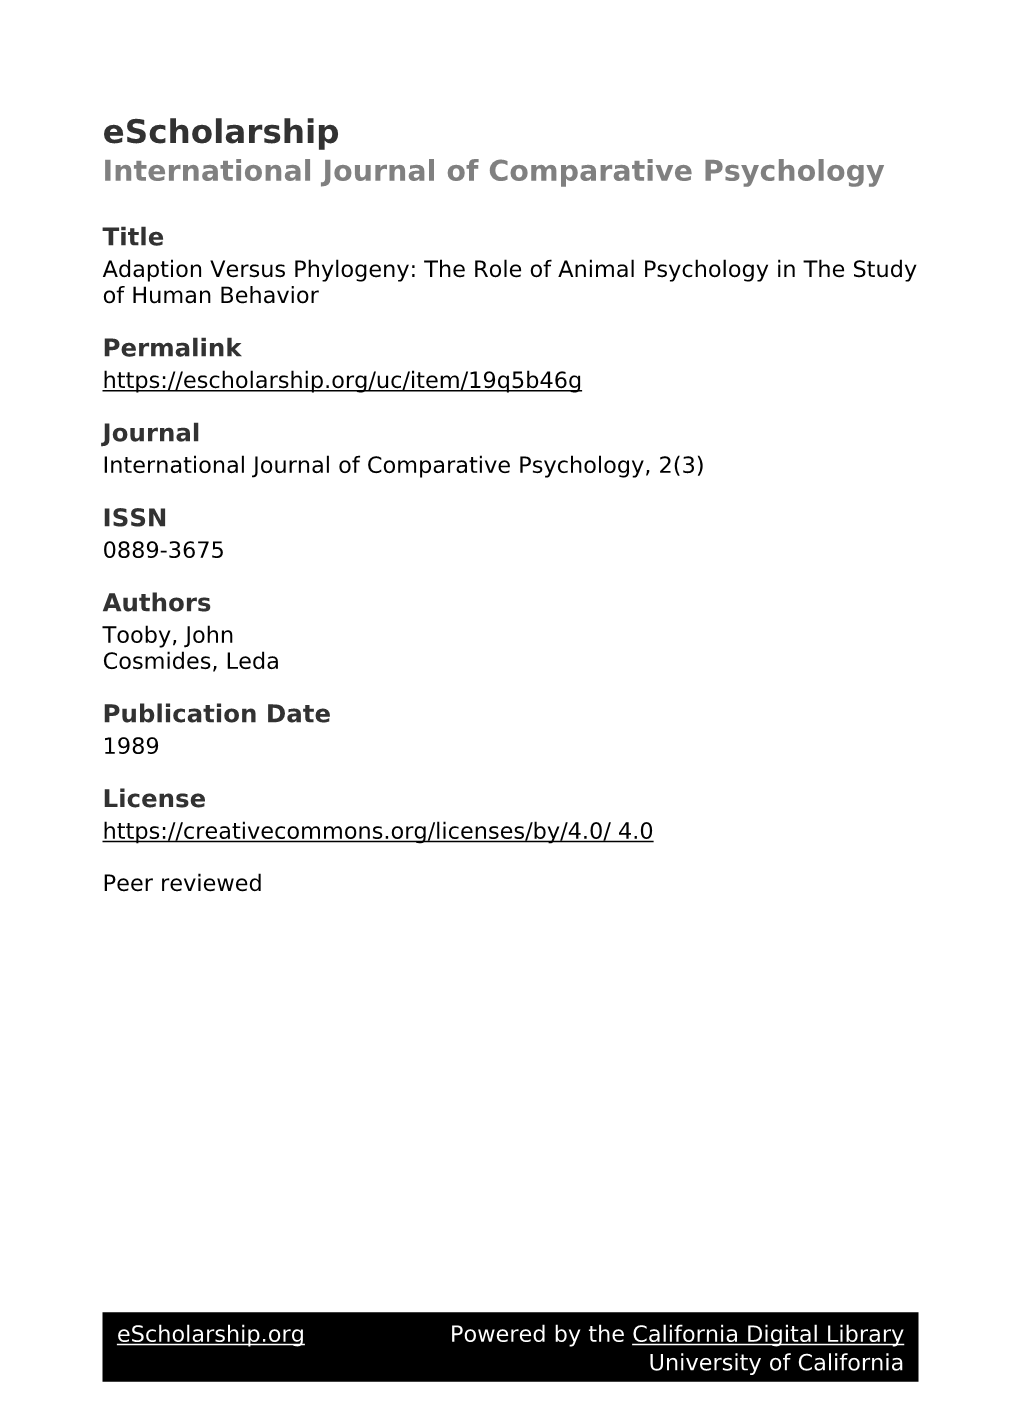 The Role of Animal Psychology in the Study of Human Behavior